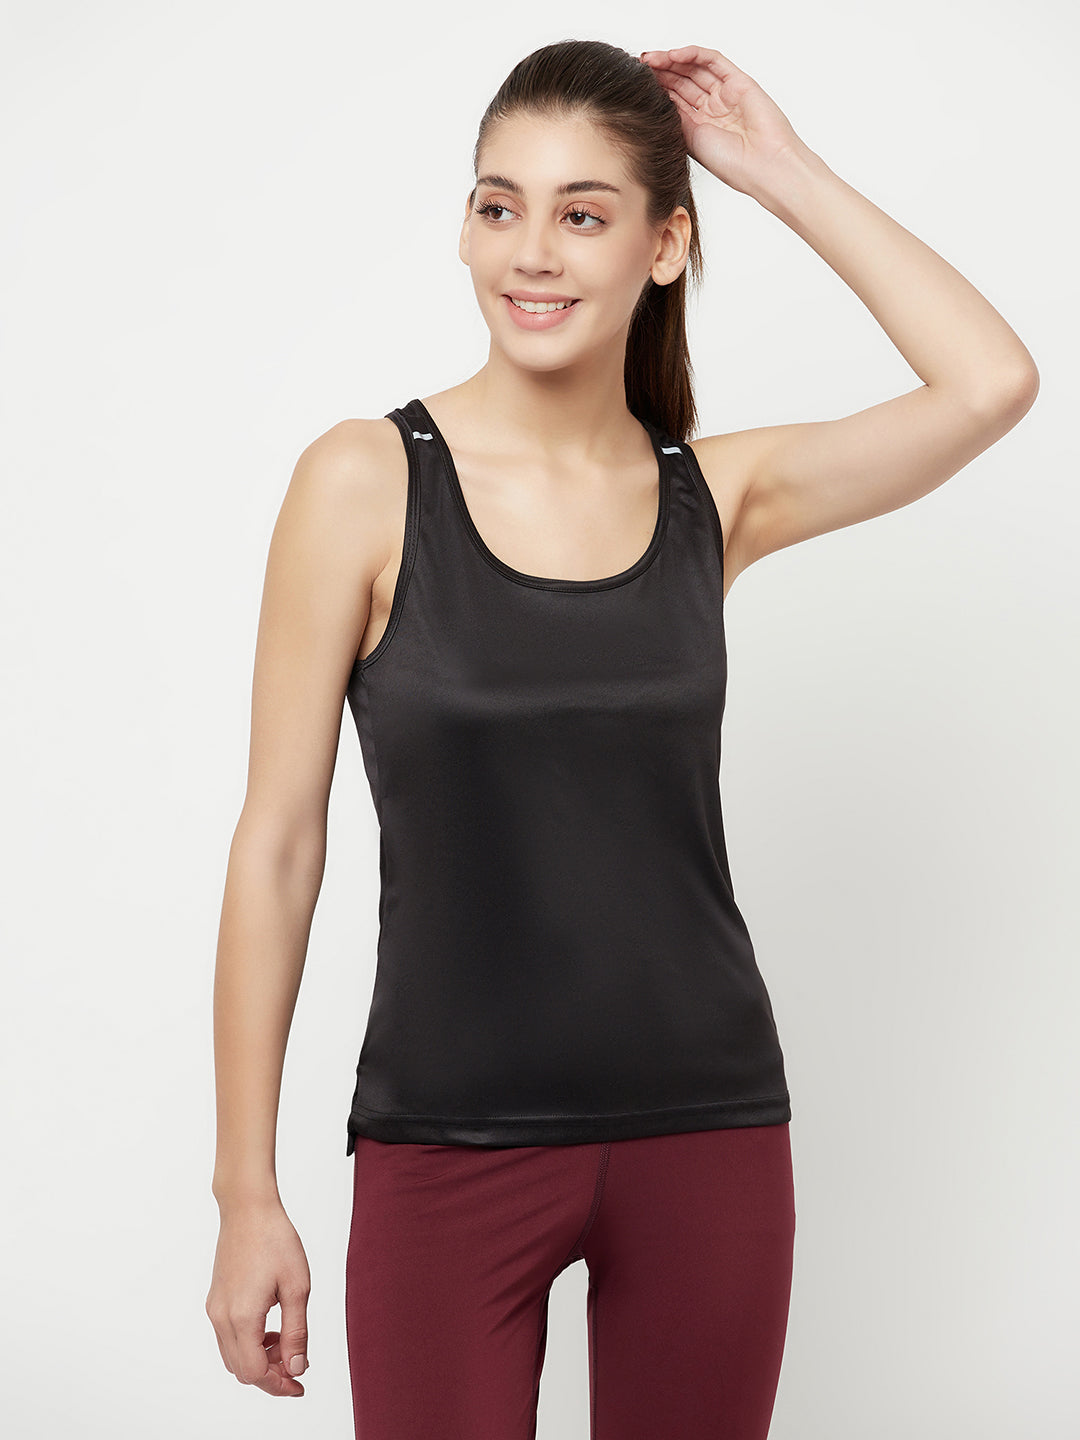 Workout Tops for Women, Gym Tops for Women